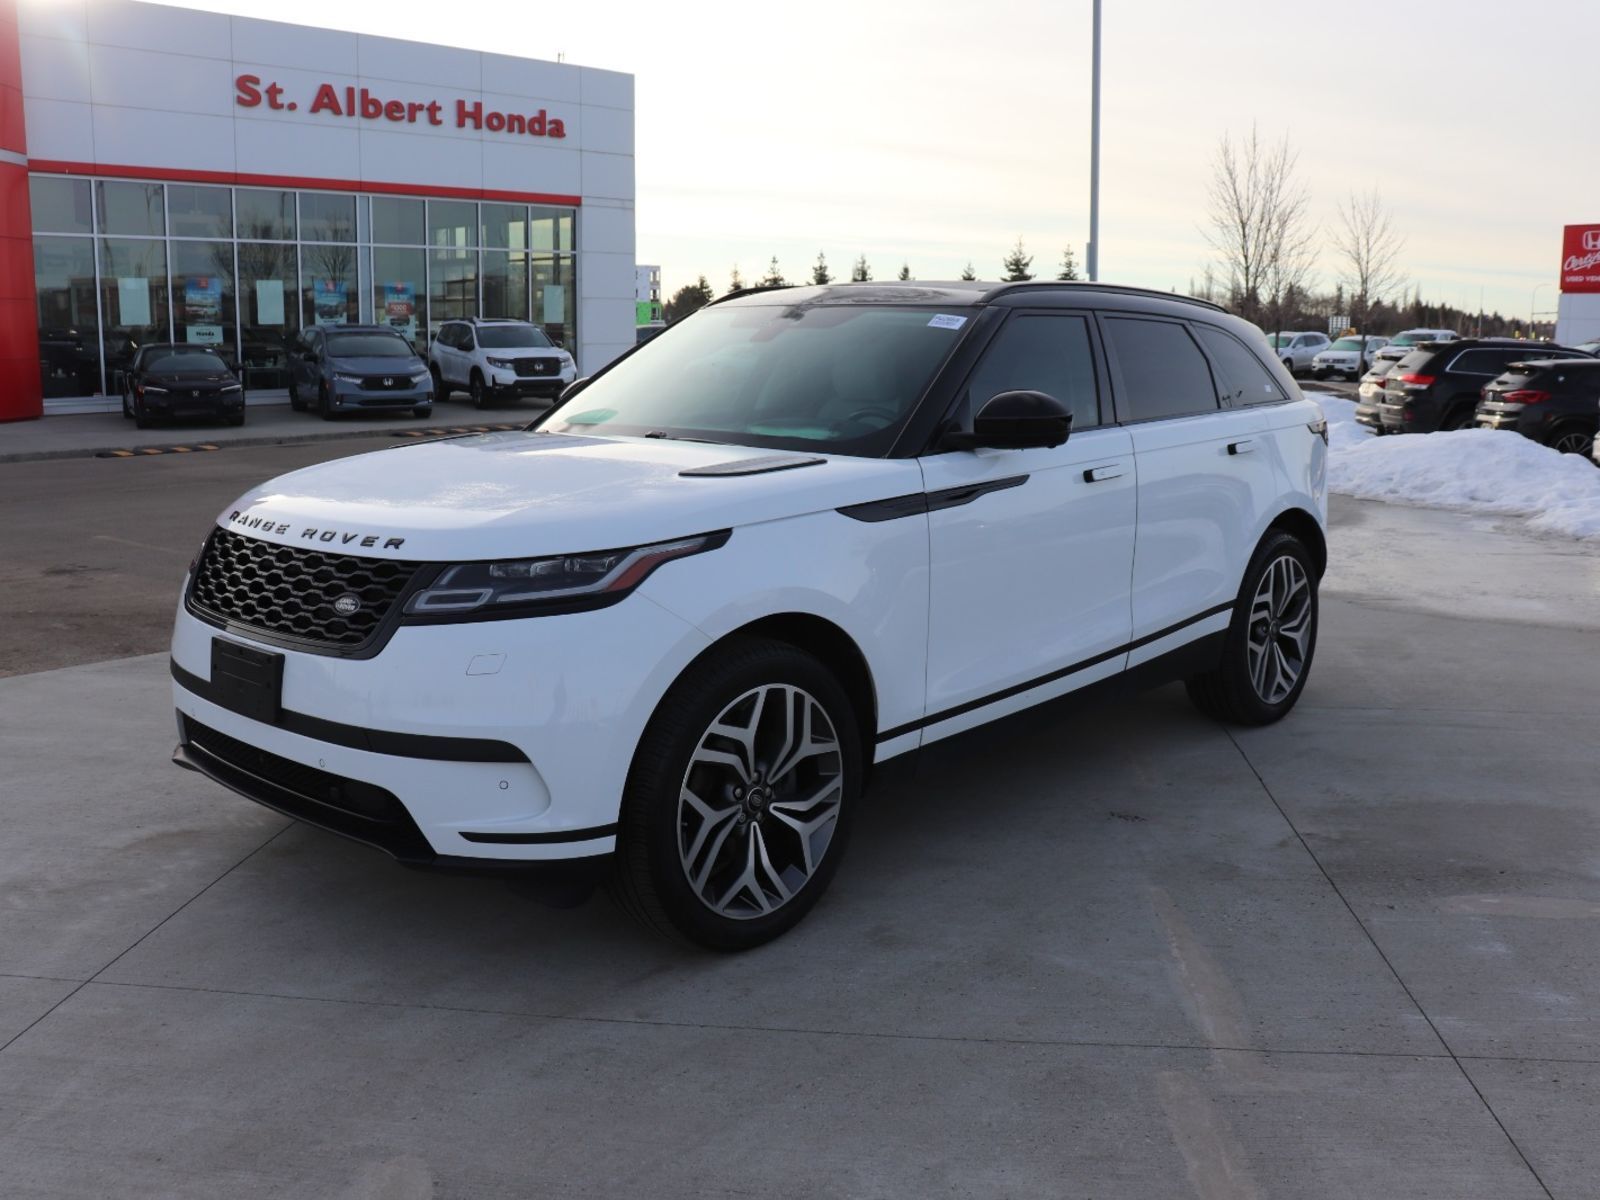 2020 Land Rover Range Rover Velar S: AWD/LEATHER/CLEAN CARFAX